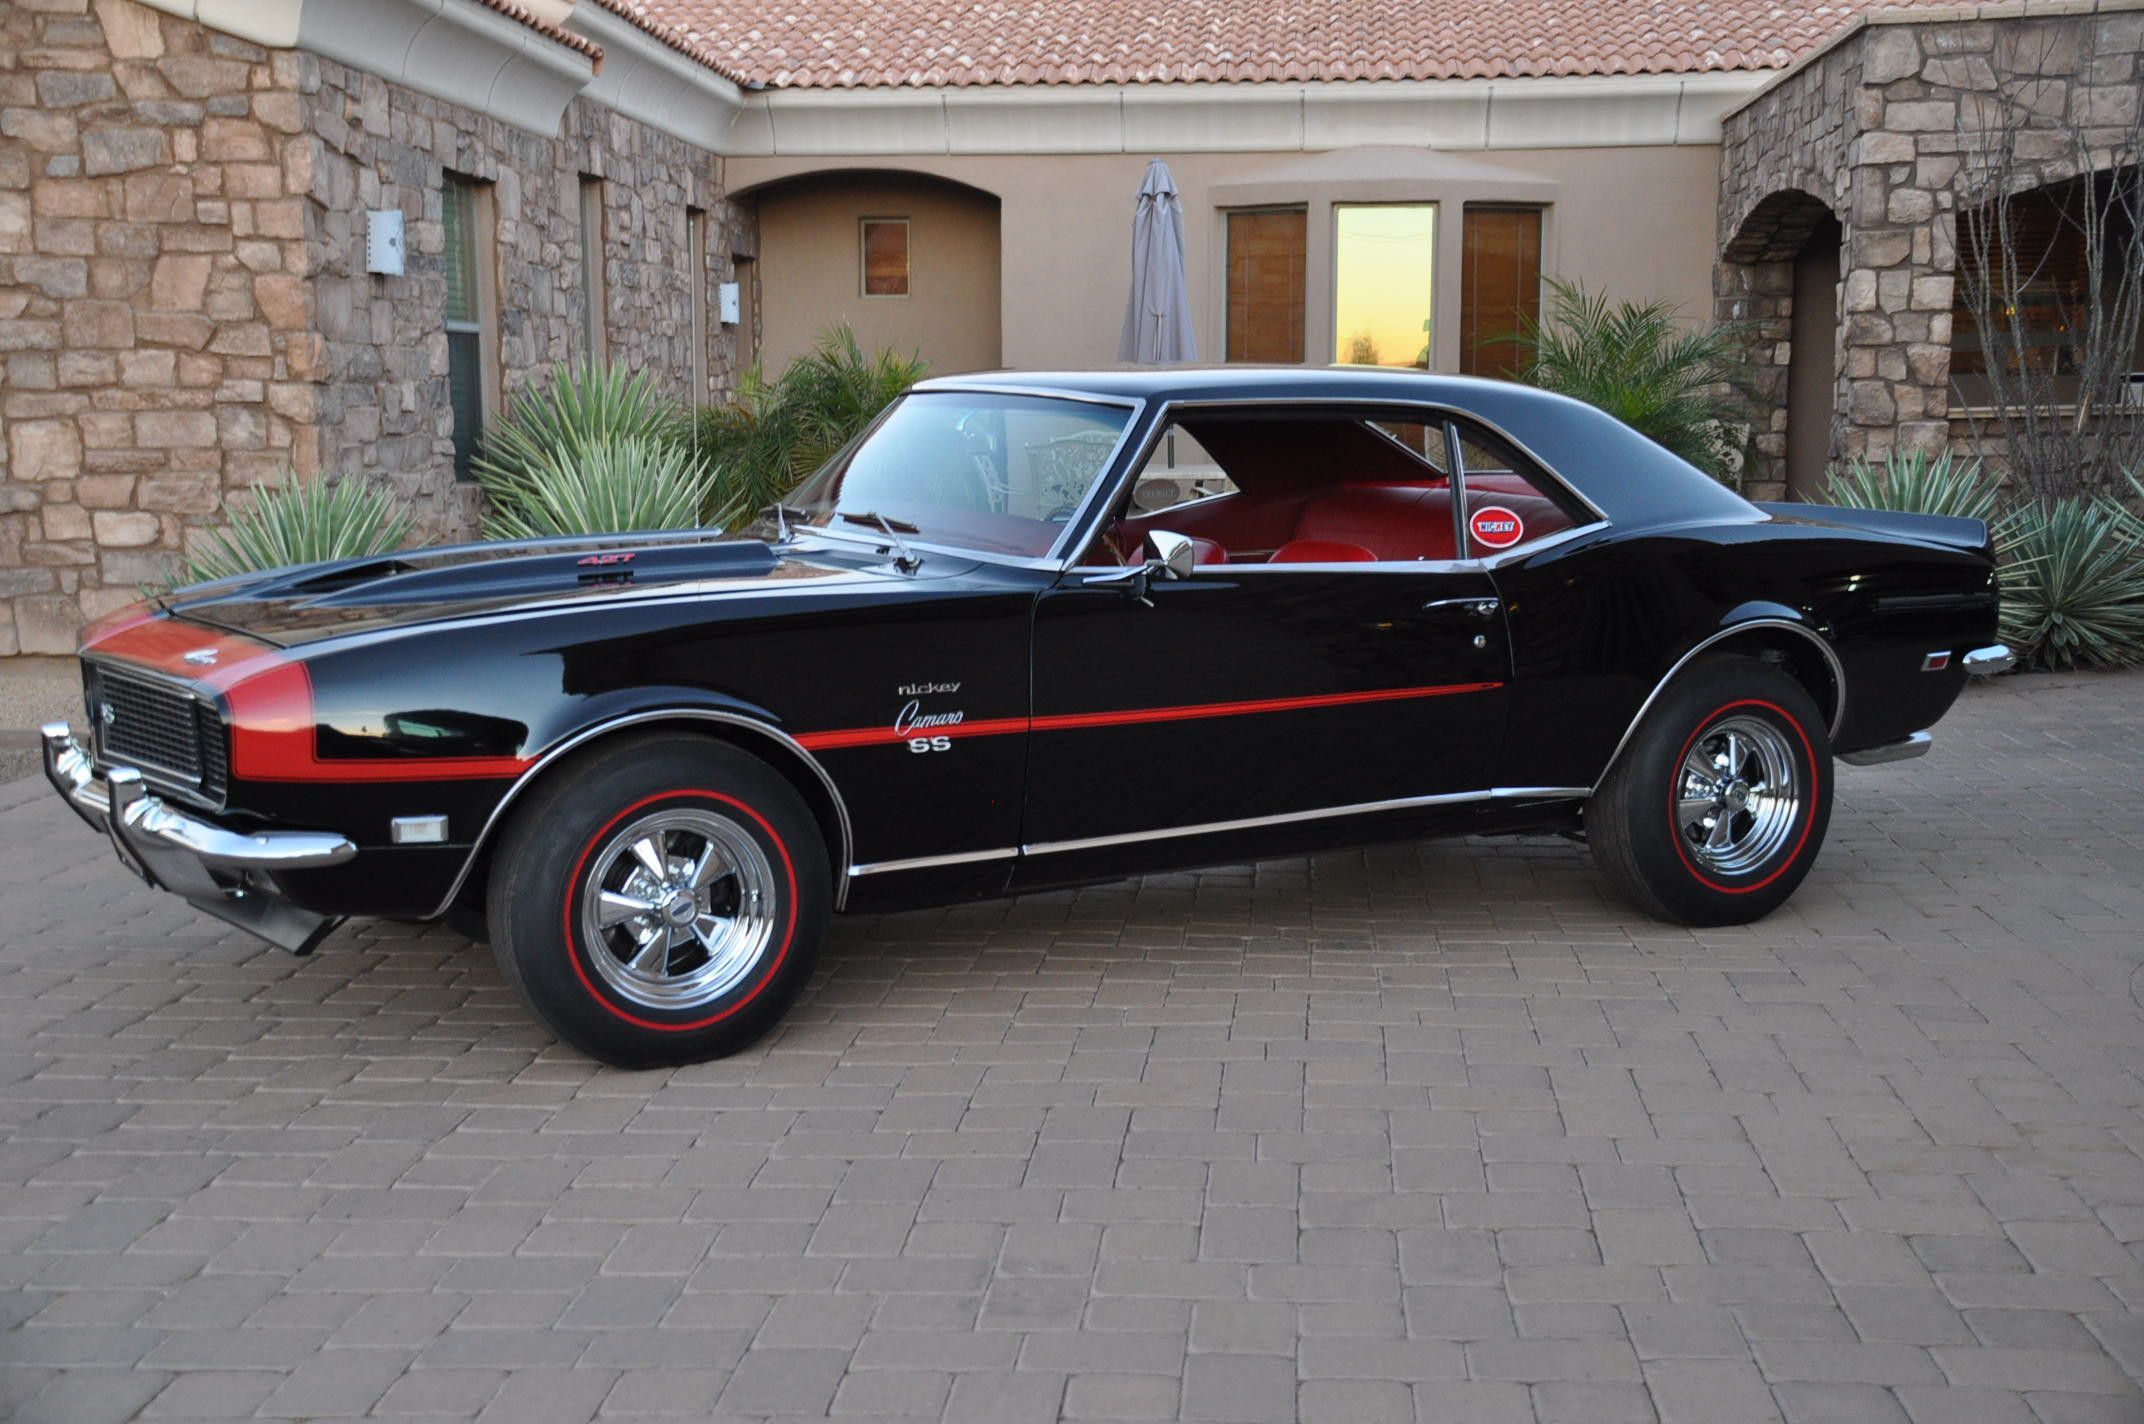 Classic Camaro SS looking sharp in red and black.